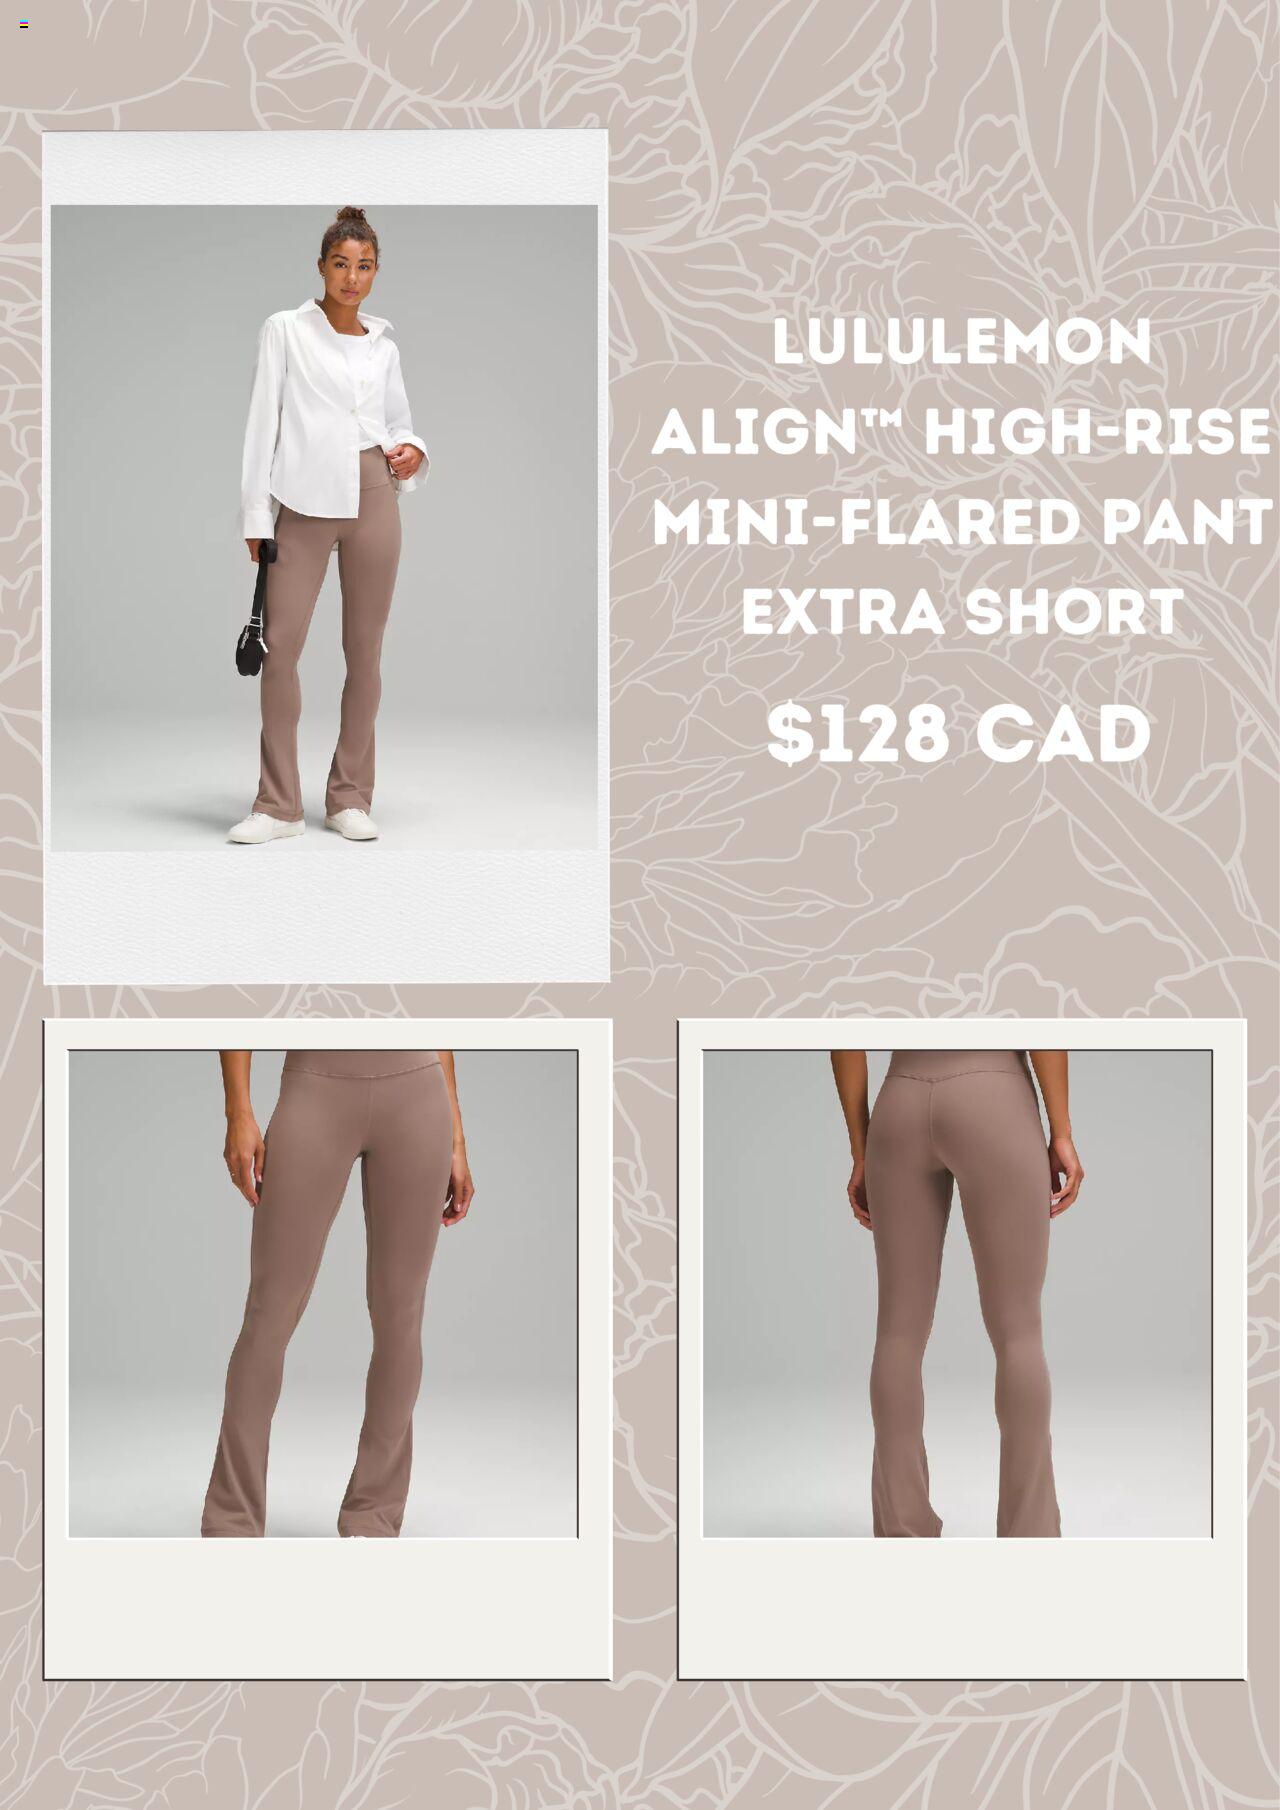 Lululemon - New Products Specials - Page 5